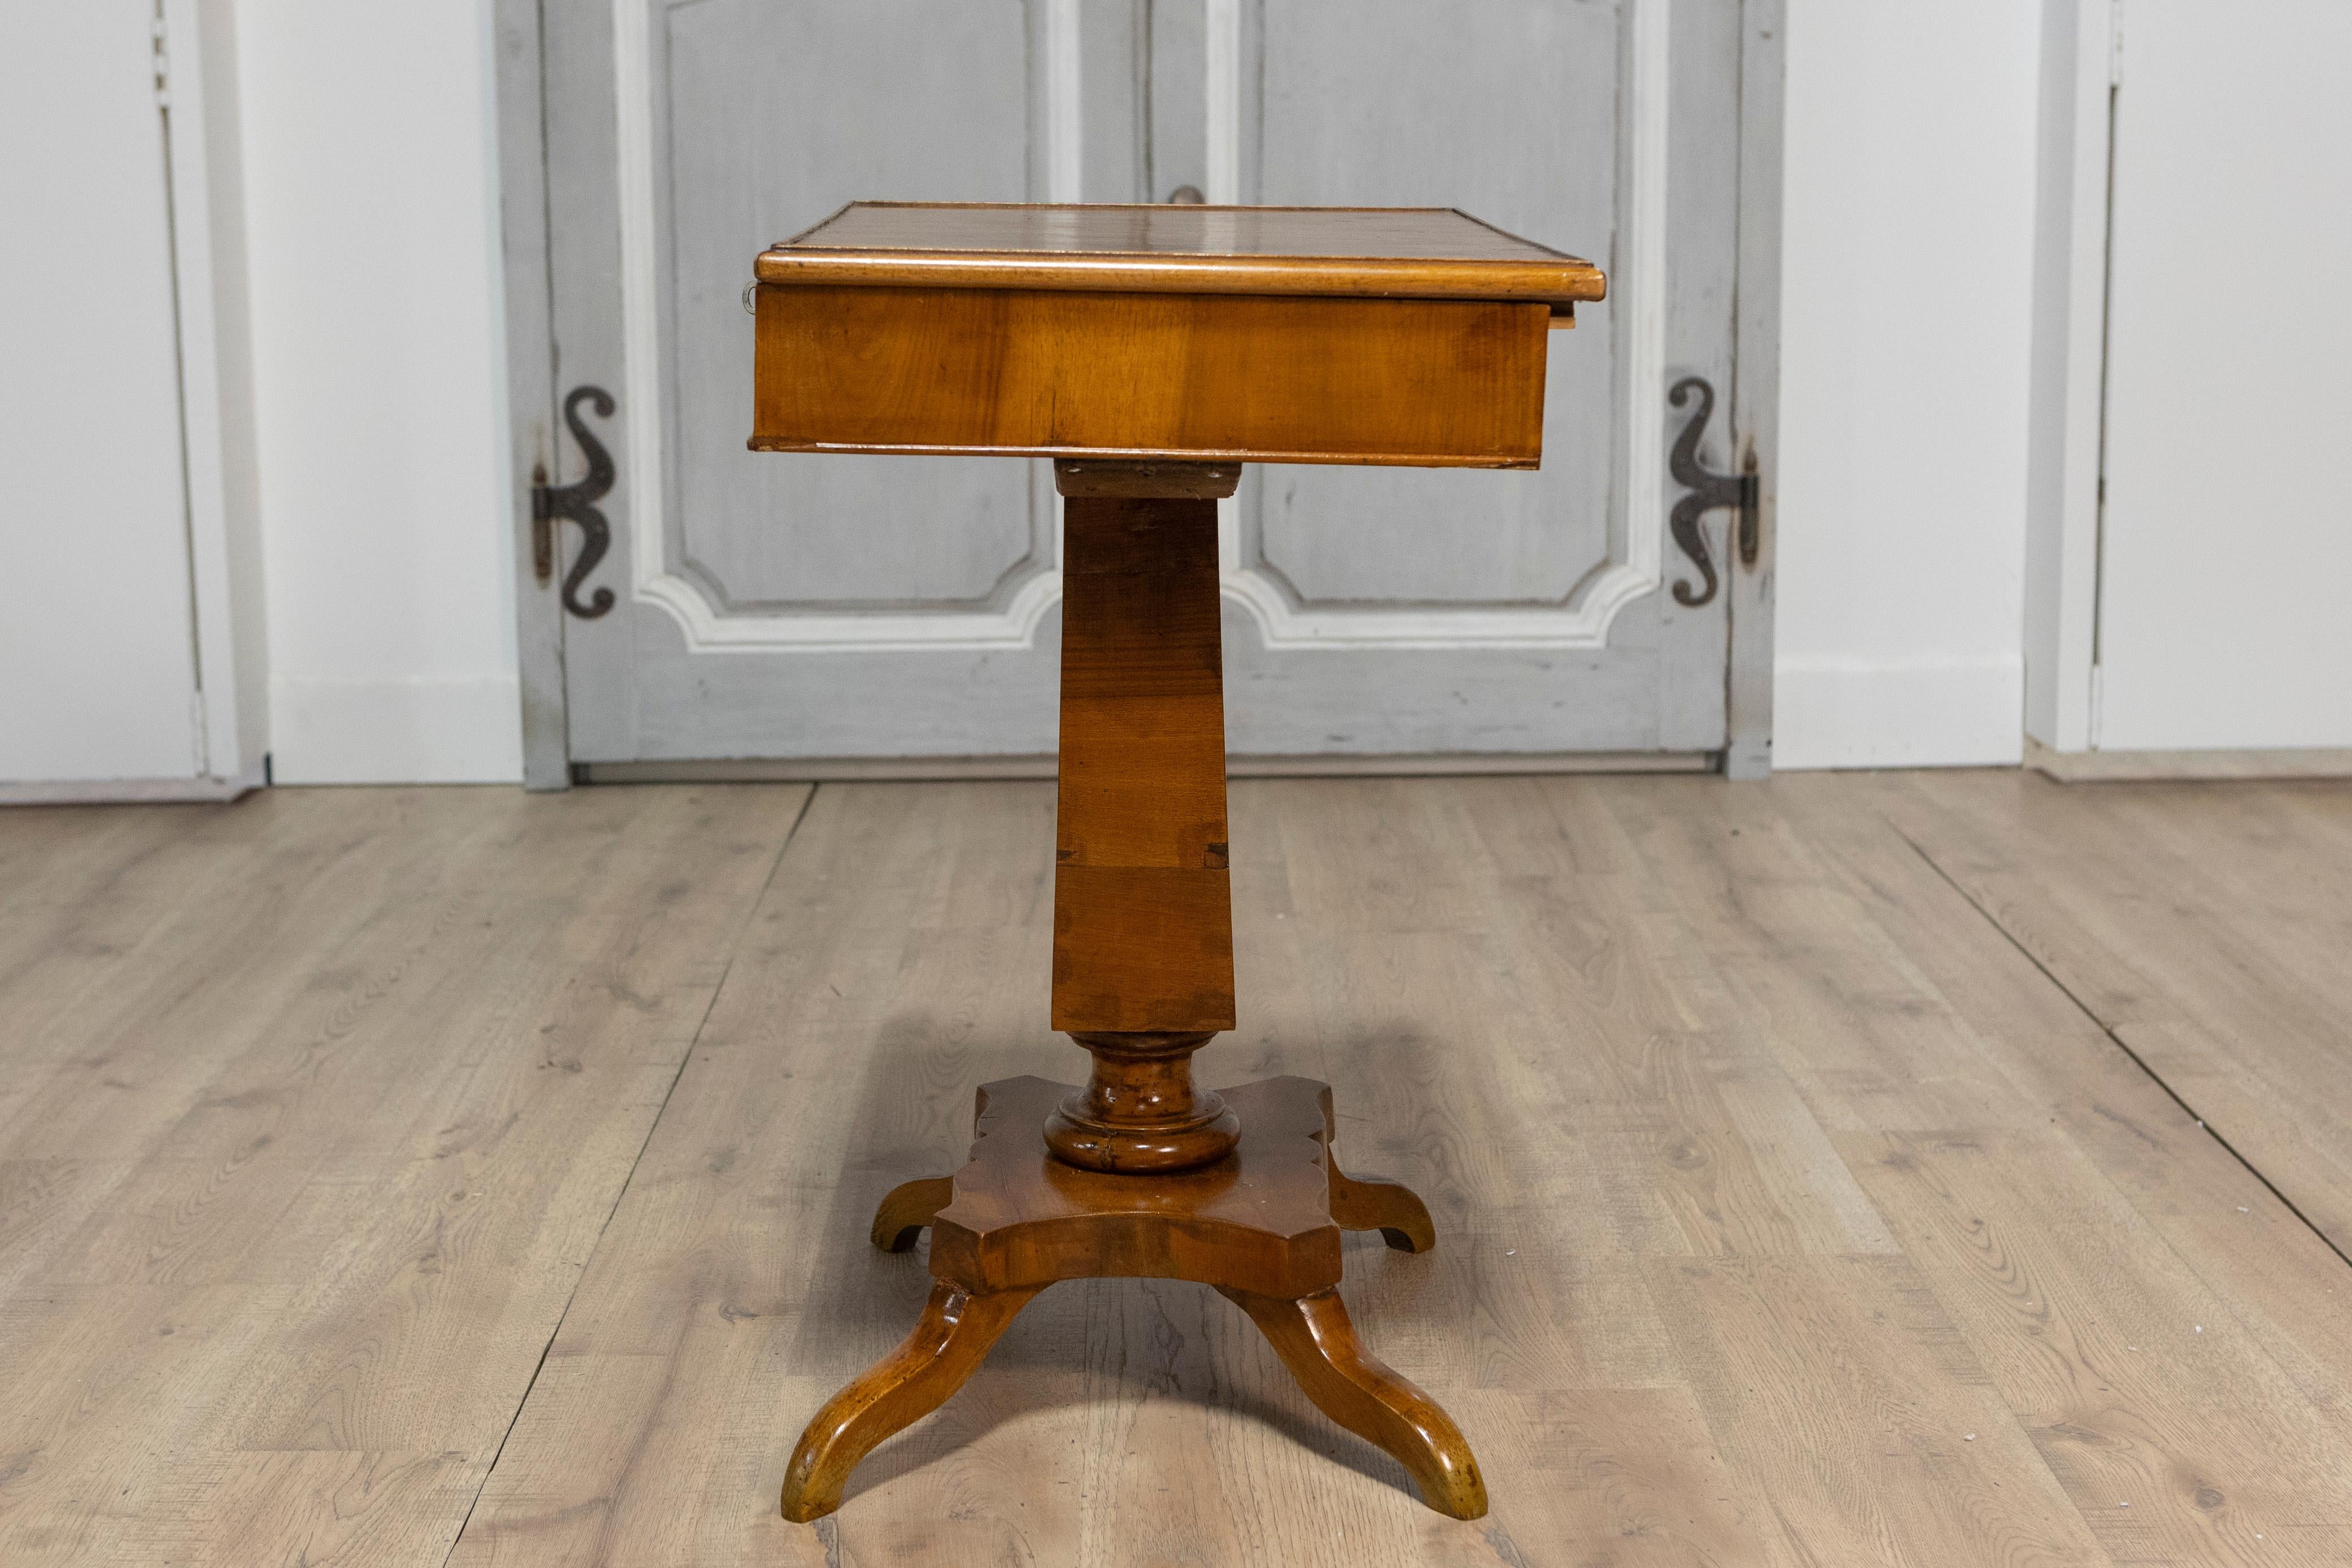 Italian 19th Century Walnut Pedestal Table with Quadripod Base and Single Drawer For Sale 6